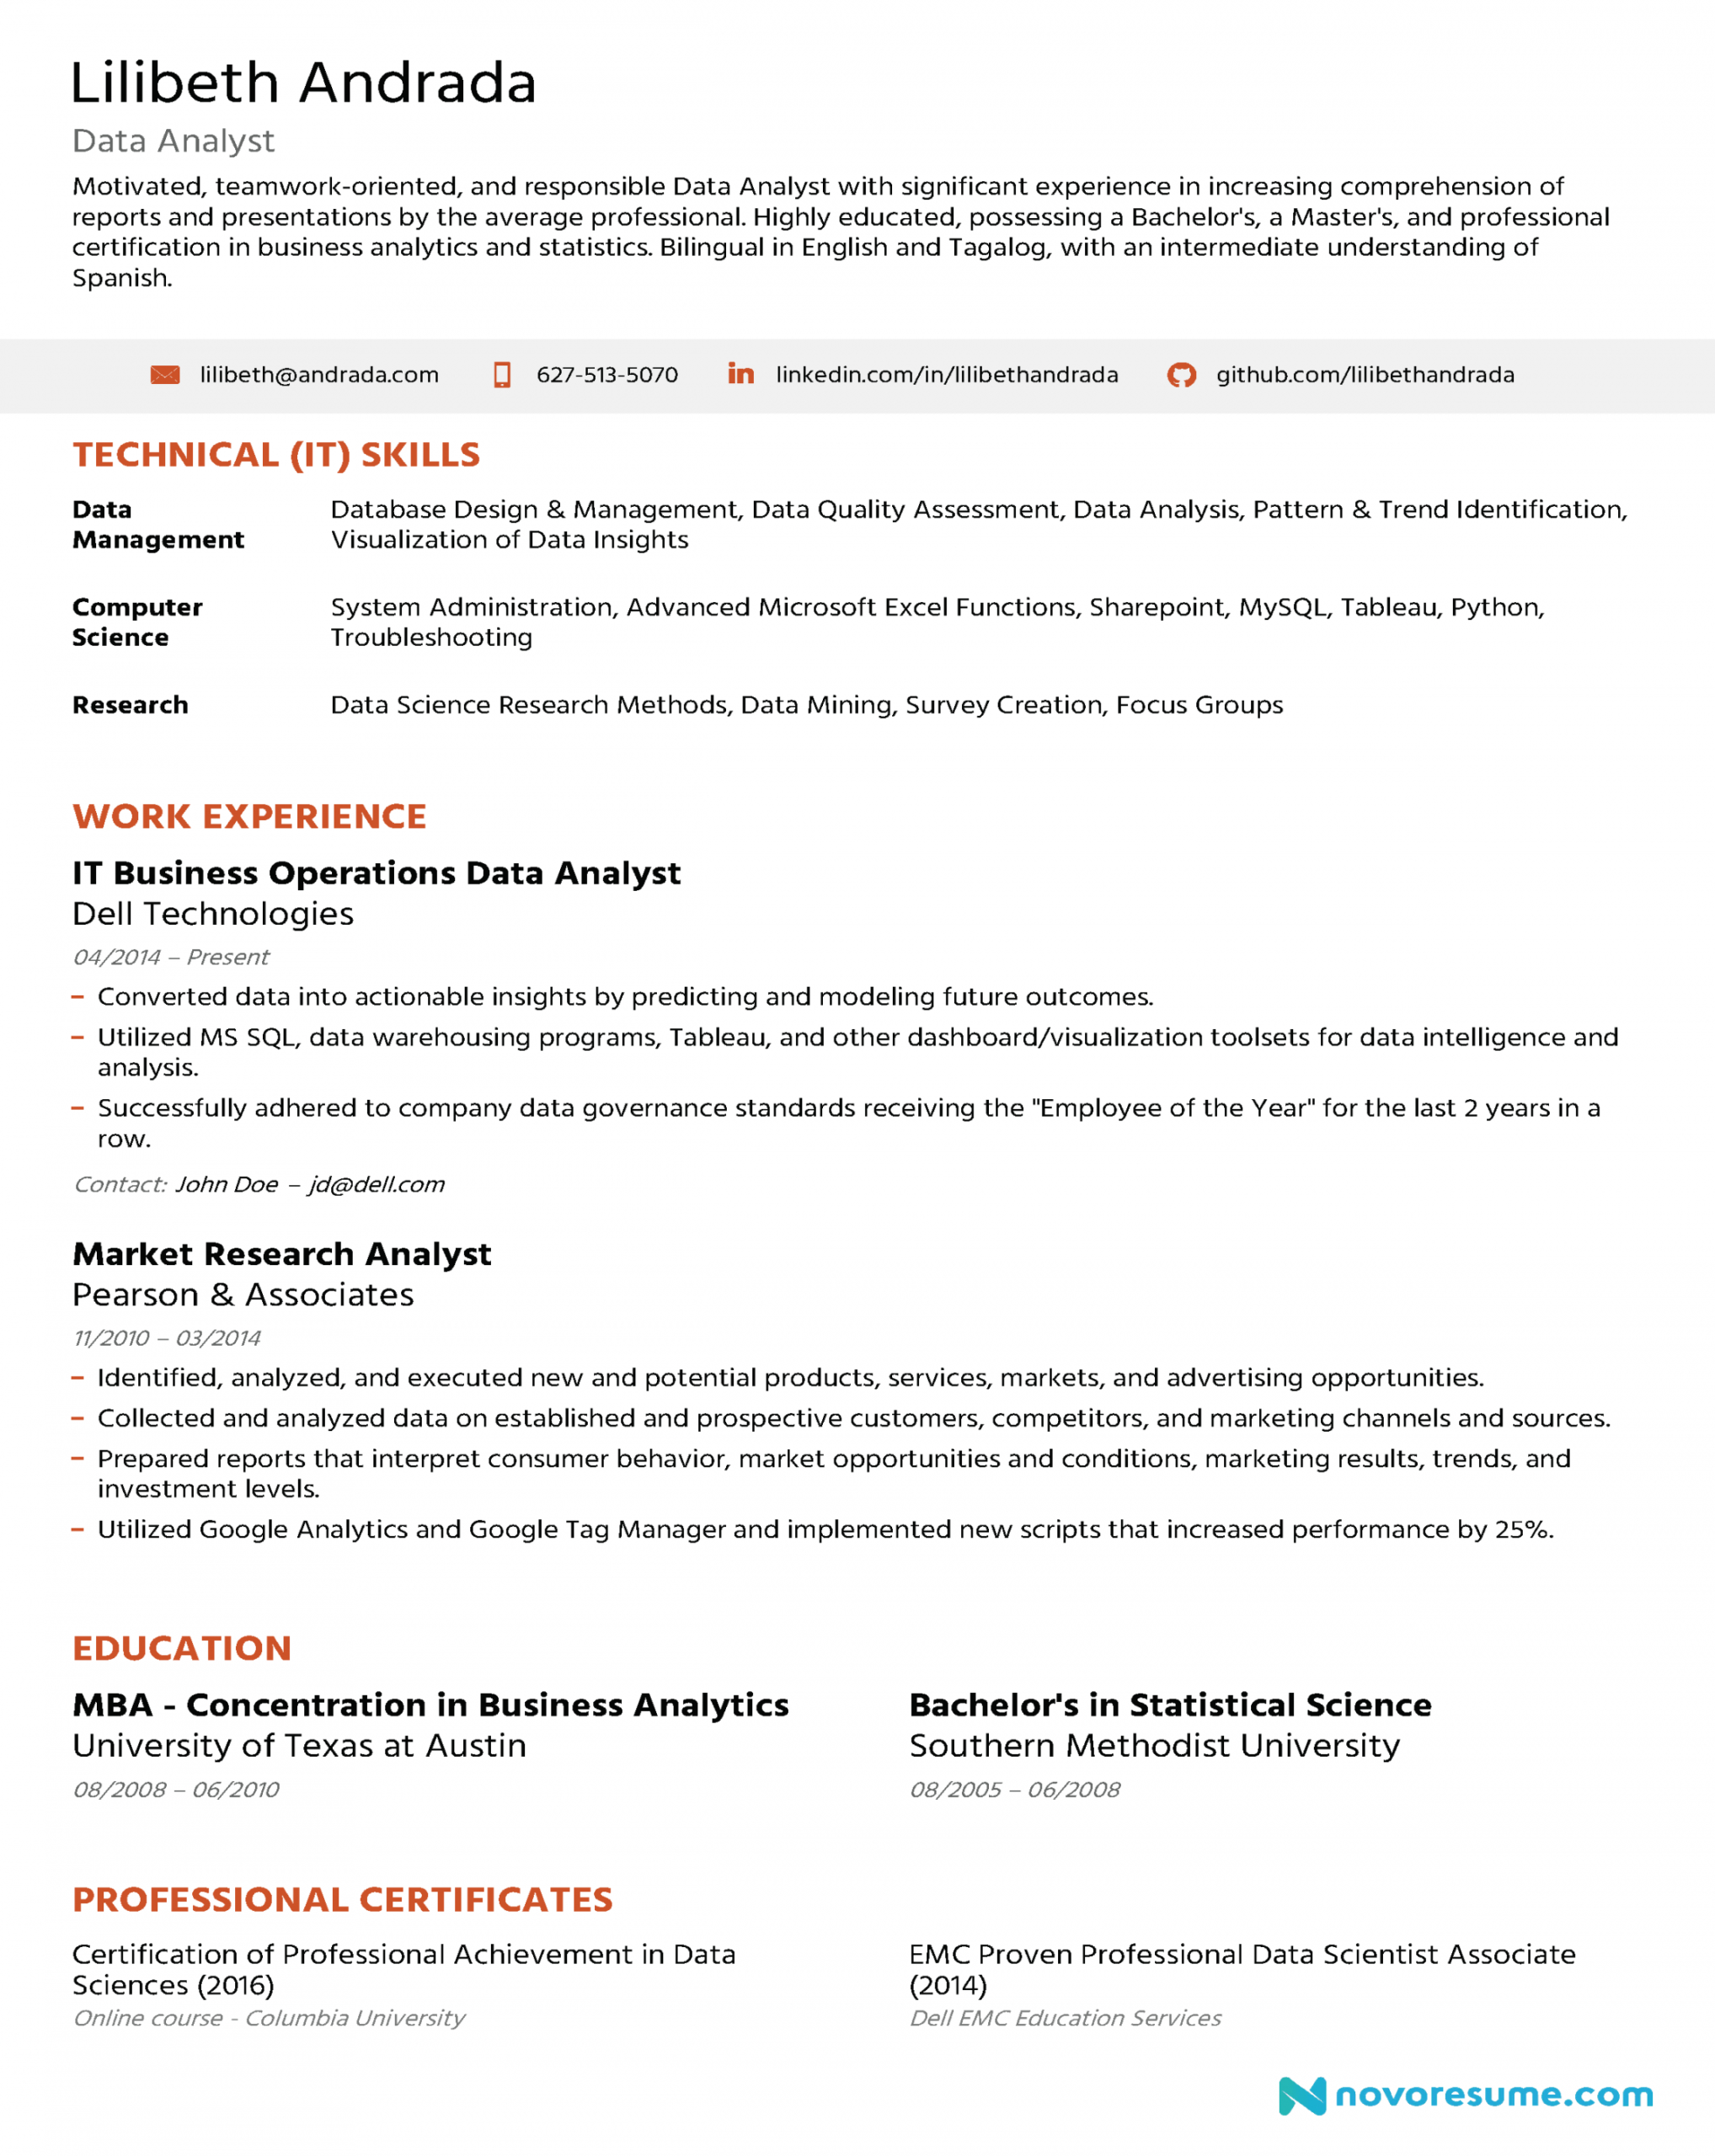 Data Analyst Resume - Guide & Examples for